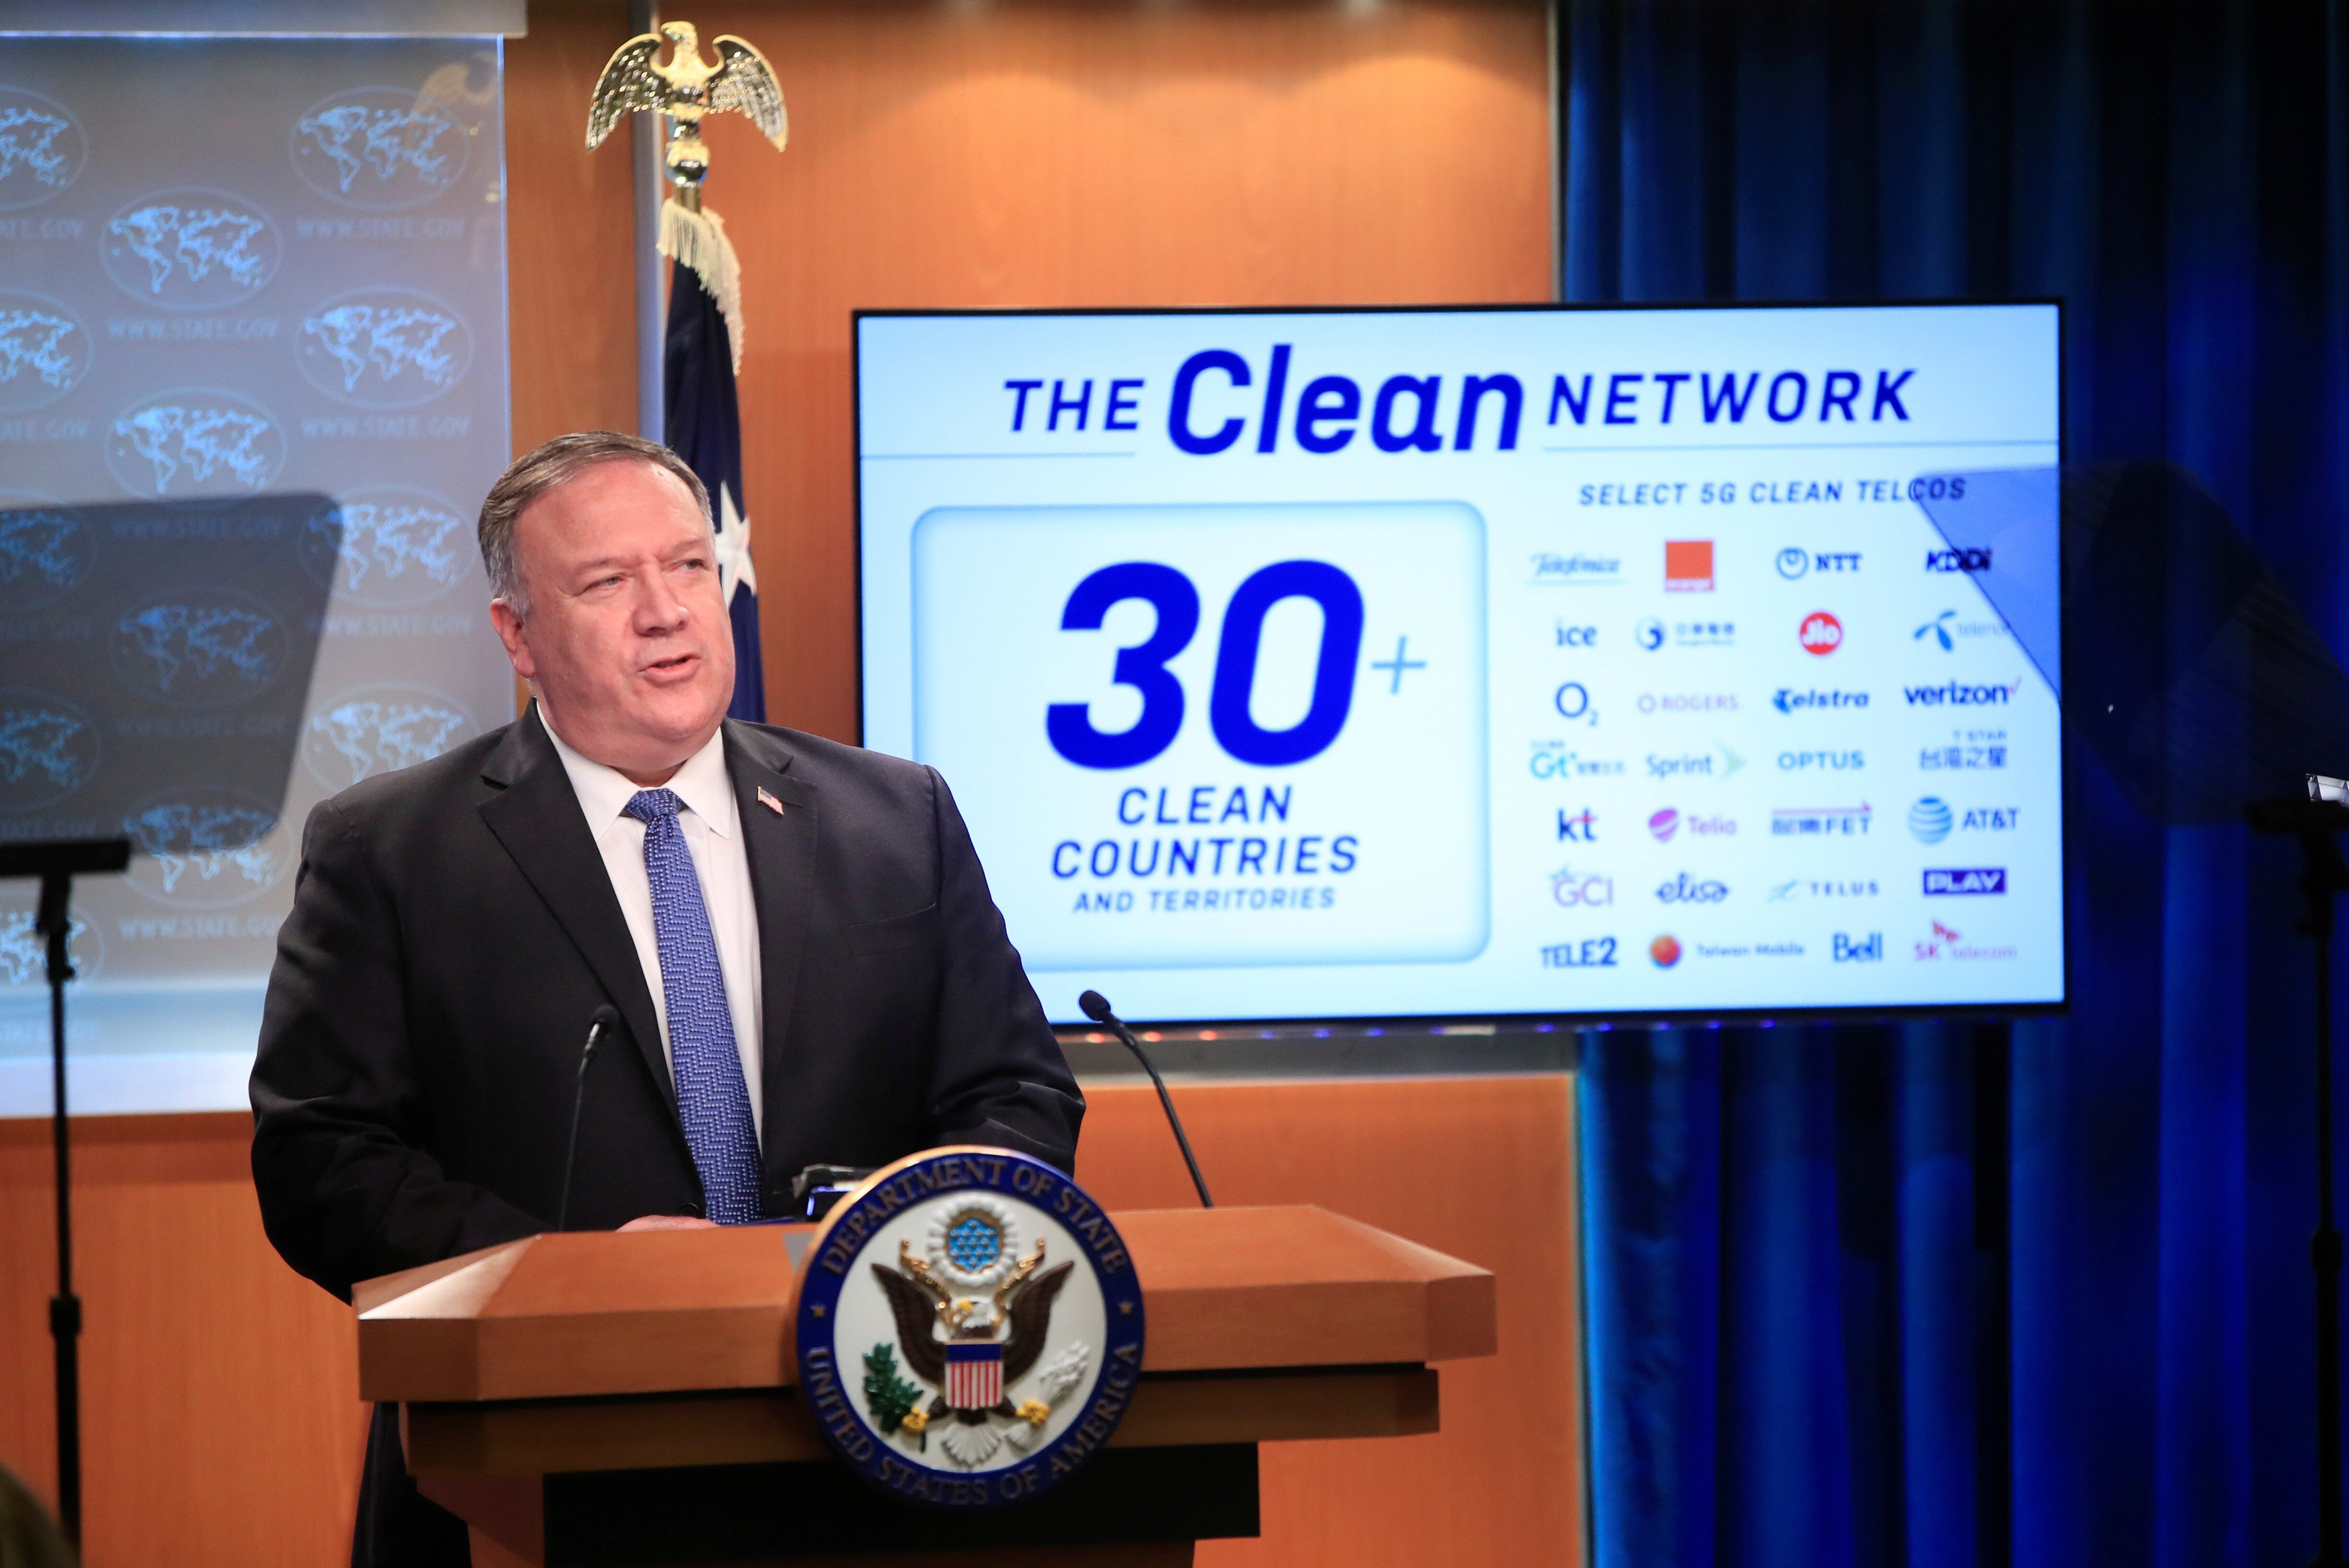 Mike Pompeo, the US Secretary of State, outlines the mission of the Trump administration’s Clean Network programme in a news conference at the State Department in Washington on August 5. Photo: Reuters